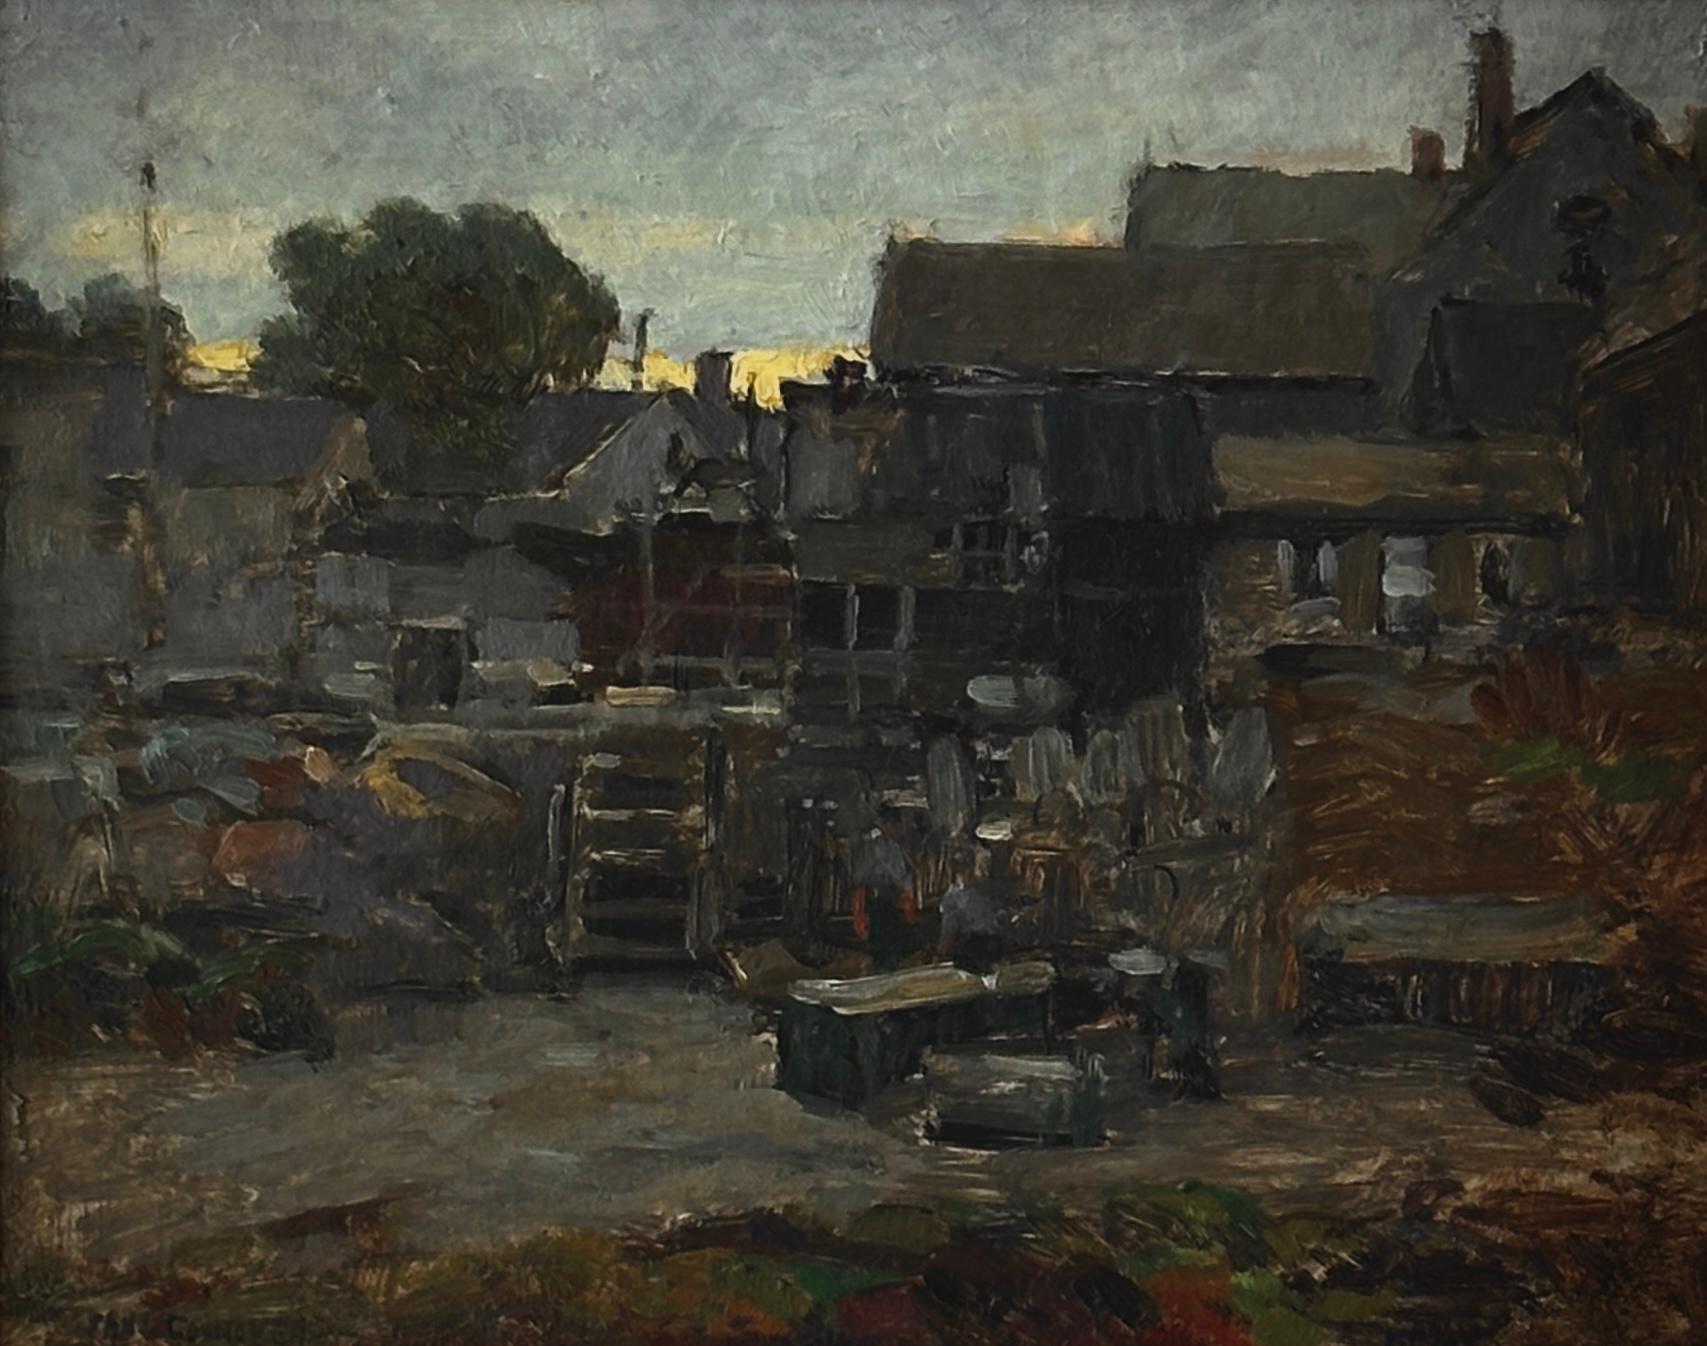 Paul Cornoyer, born in 1864 in St. Louis, Missouri, was an American Impressionist artist. Initially studying at the St. Louis School of Fine Arts under Halsey C. Ives, he began his artistic journey painting in a style reminiscent of the Barbizon